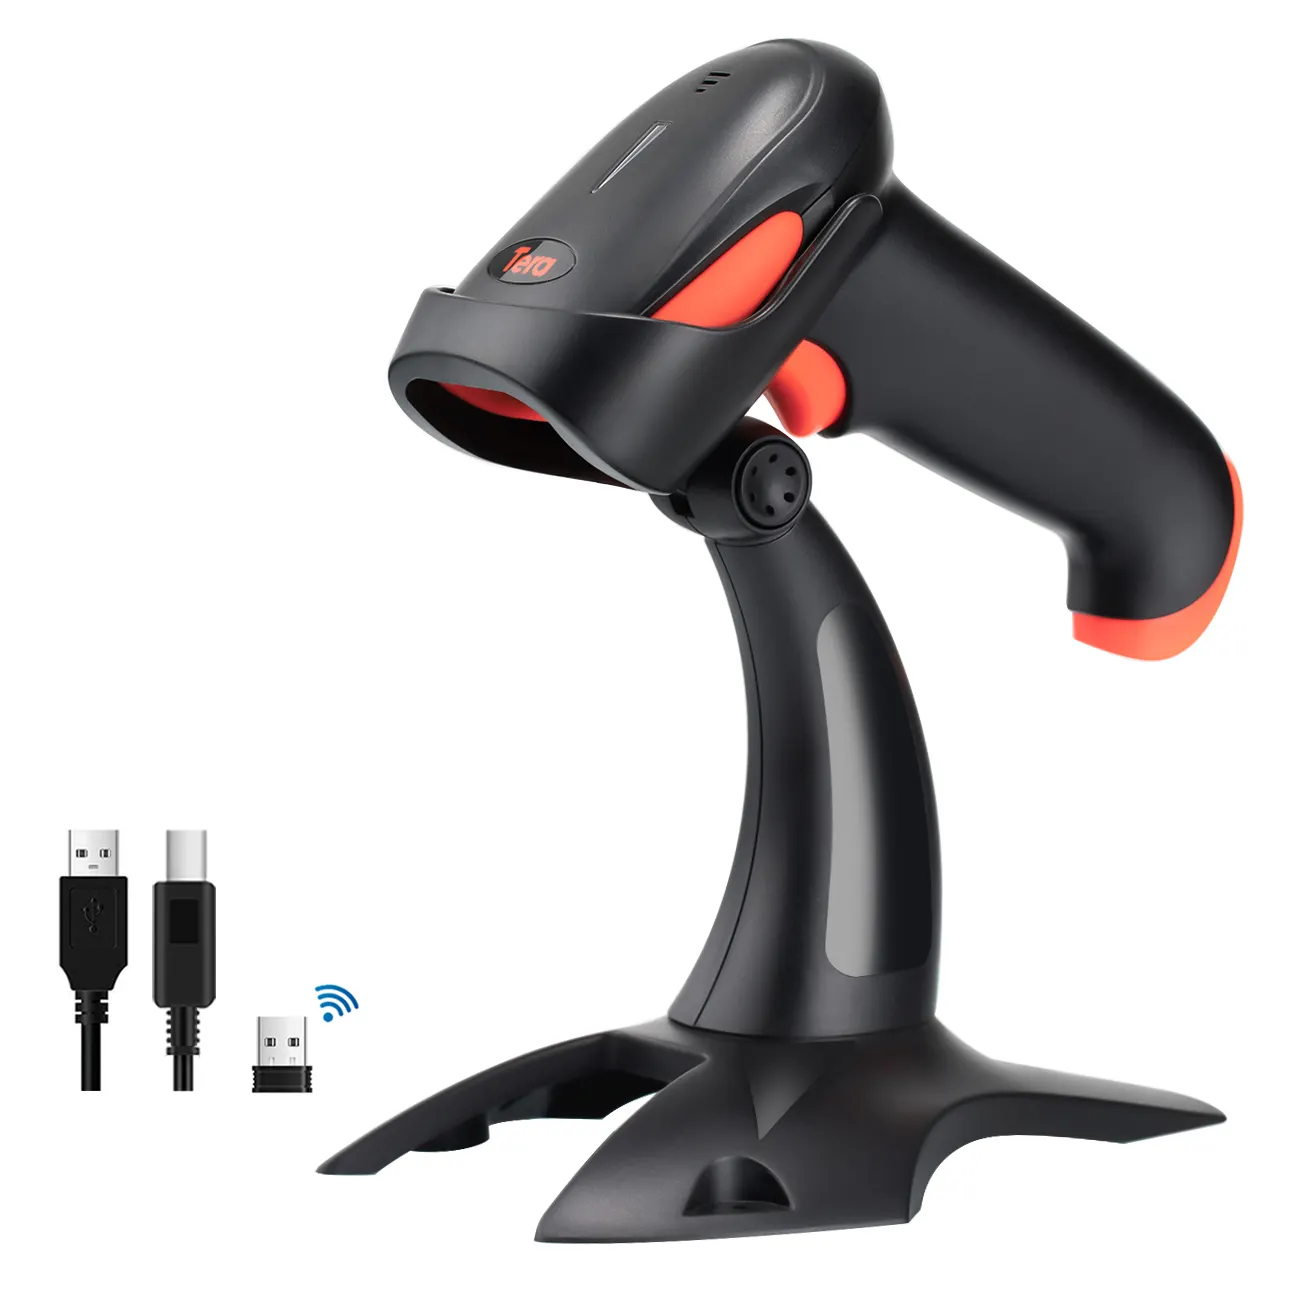 Tera Wireless&Wired 1D 2D QR Blue tooth Barcode Scanner Vibration Alert Scanner Barcode with Stand HW0002-Z